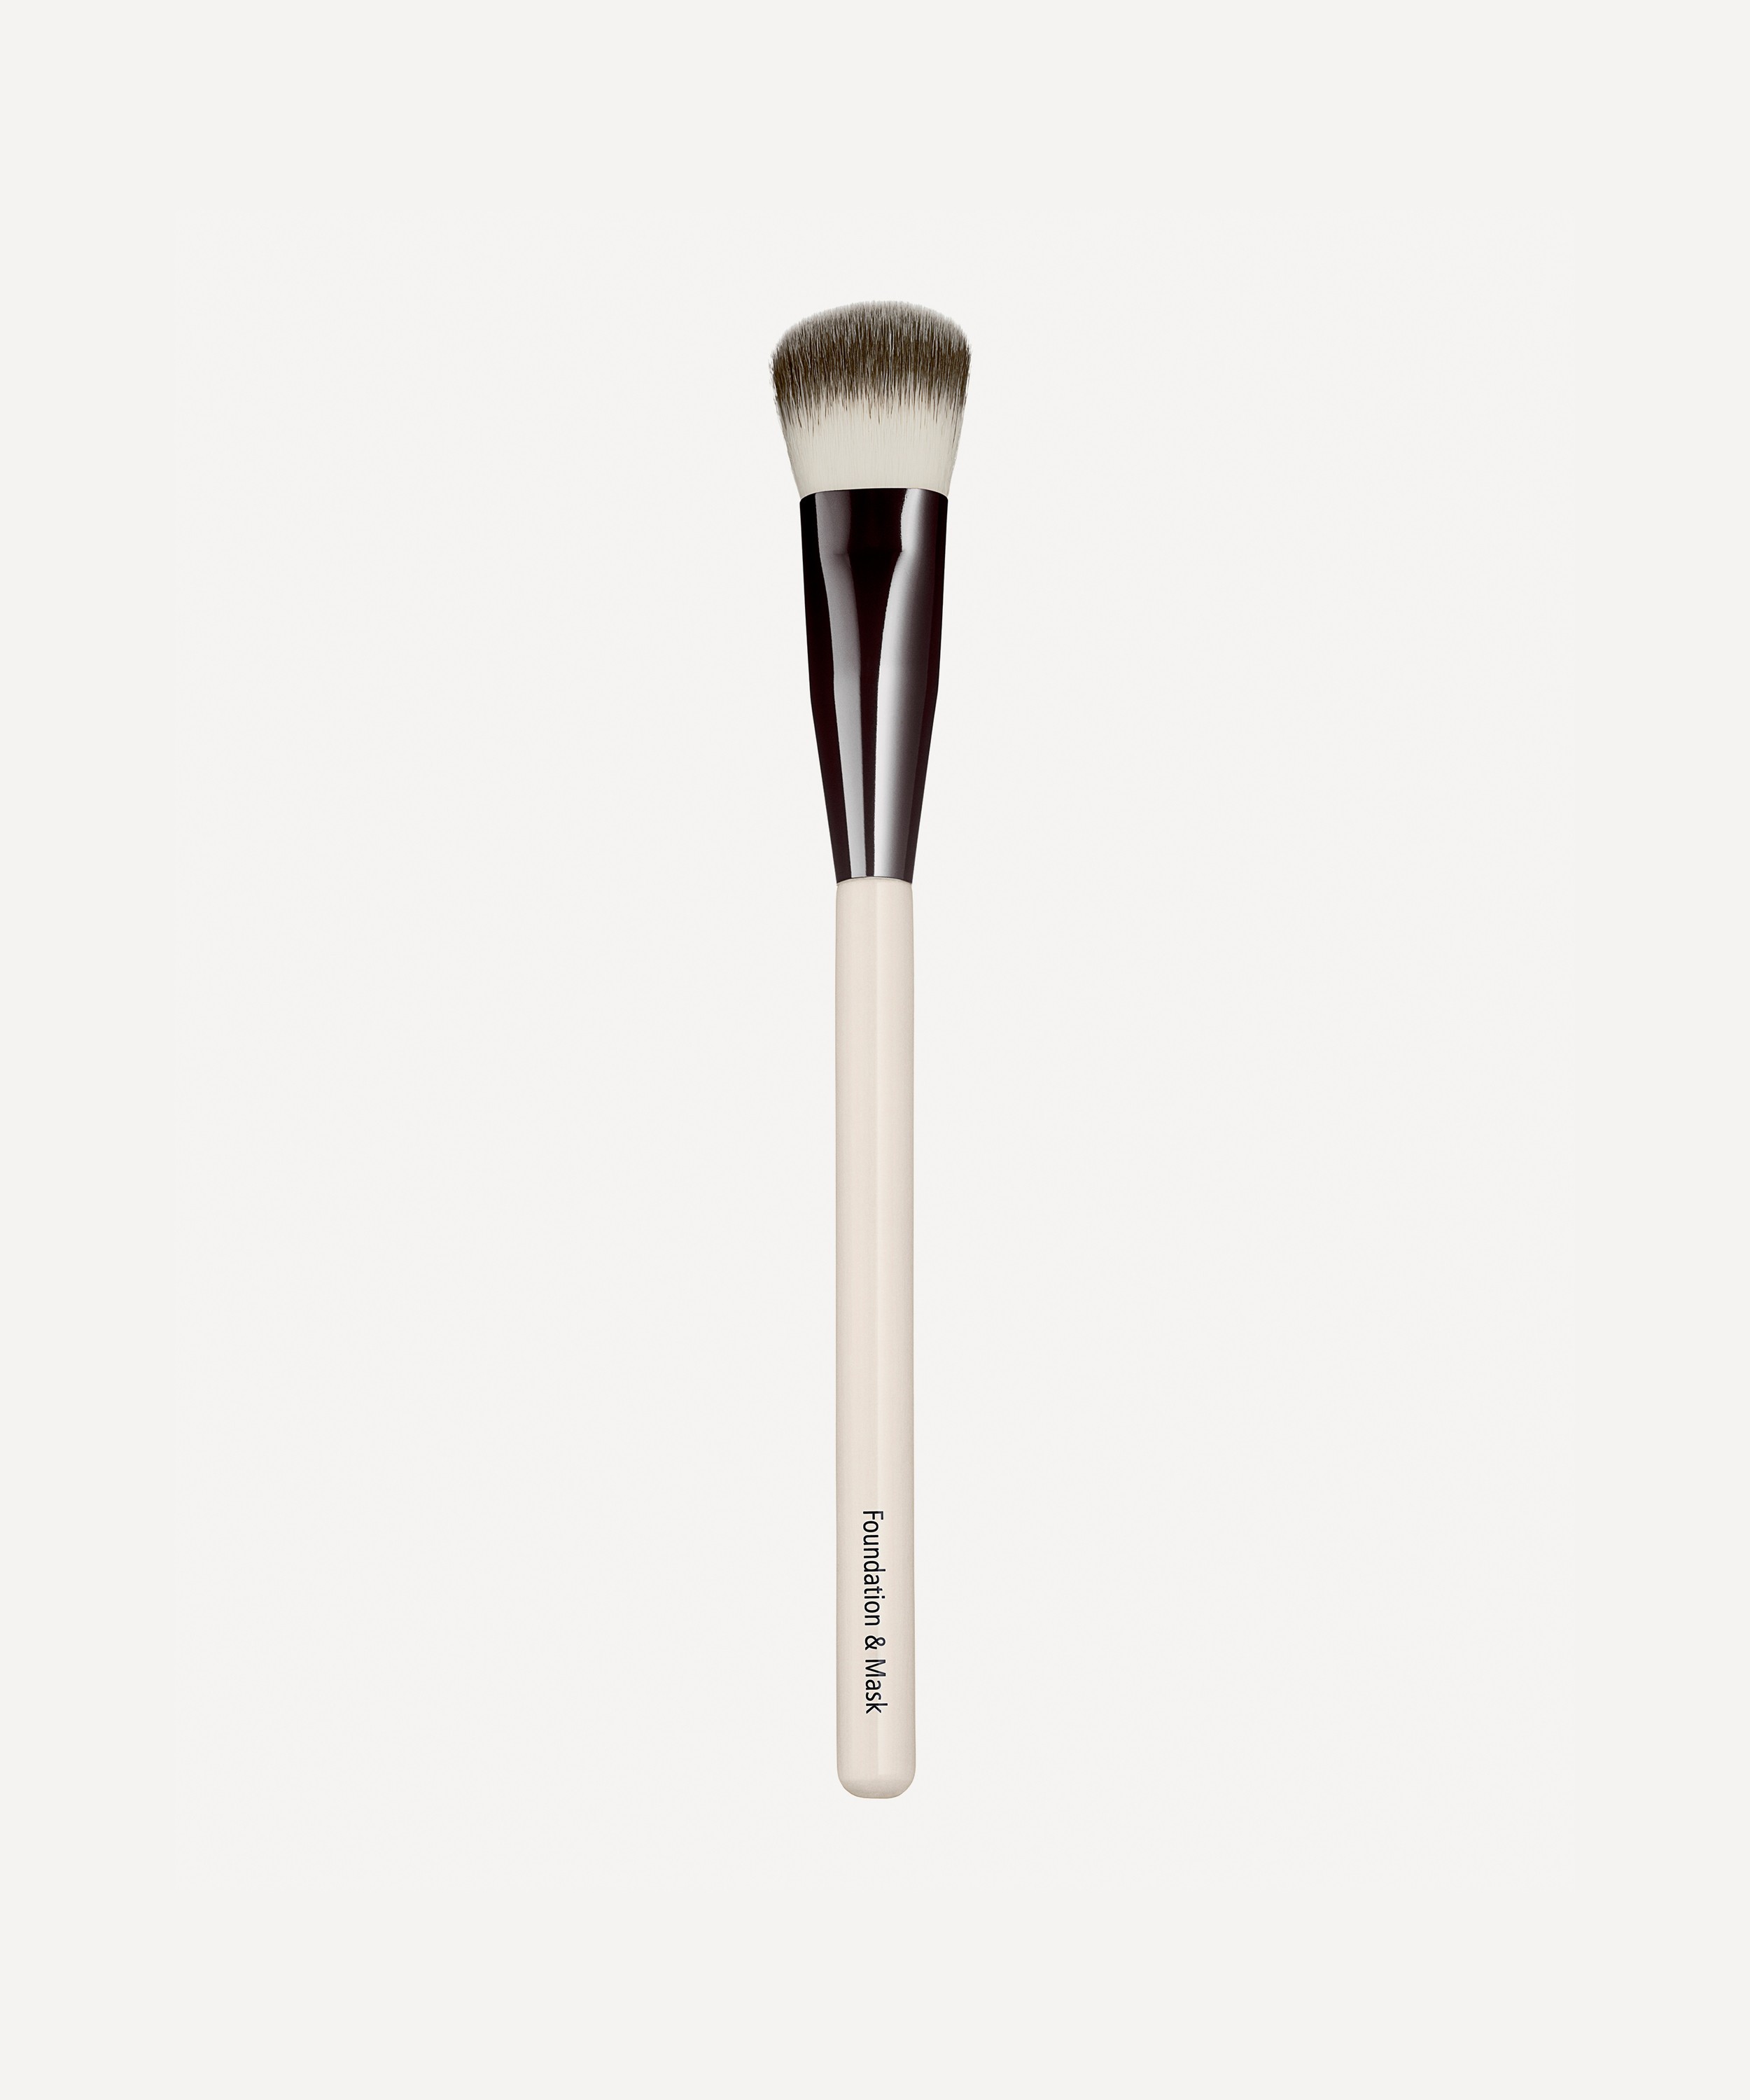 Chantecaille - Foundation and Mask Brush